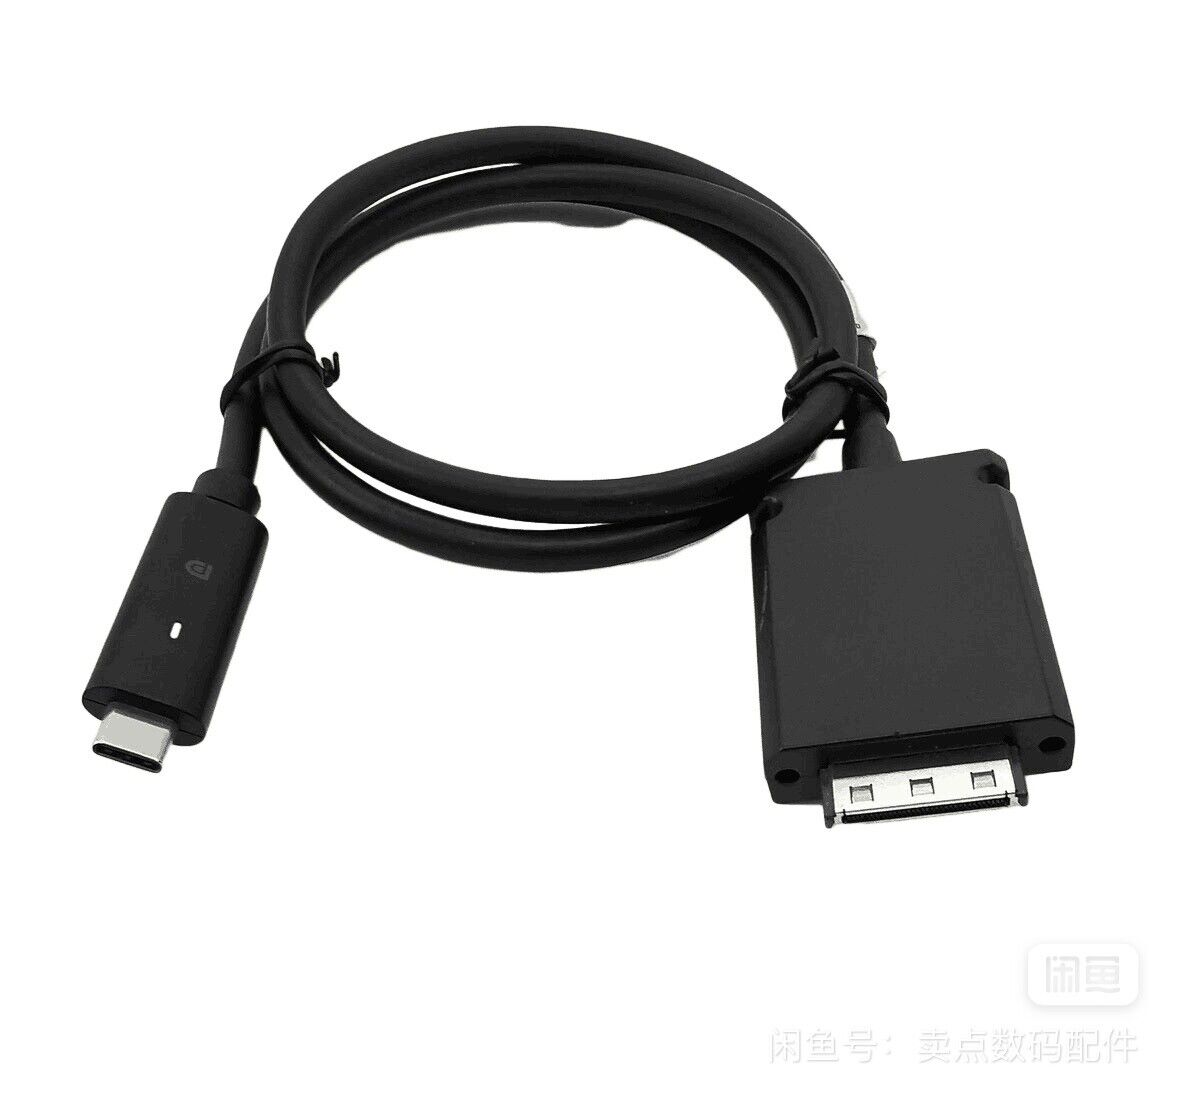 Replacement Thunderbolt 3 USB-C Cable Cord For Dell WD15 / TB16 Docking Station